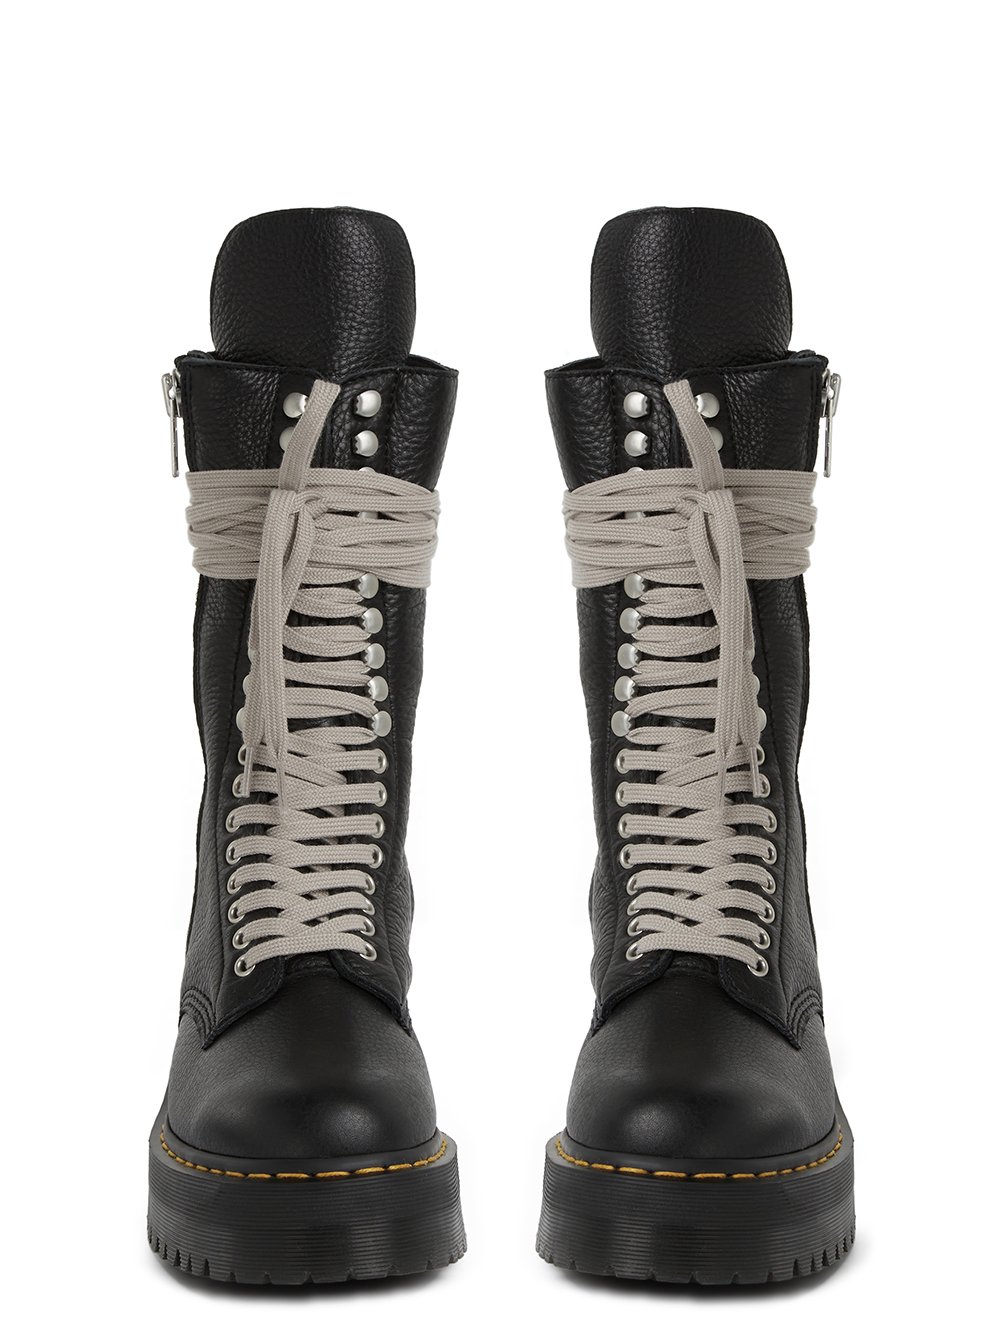 DR. MARTENS x RICK OWENS FW22 STROBE CALF LENGTH BOOT IN  BLACK MATTE GRAINY COW LEATHER. 